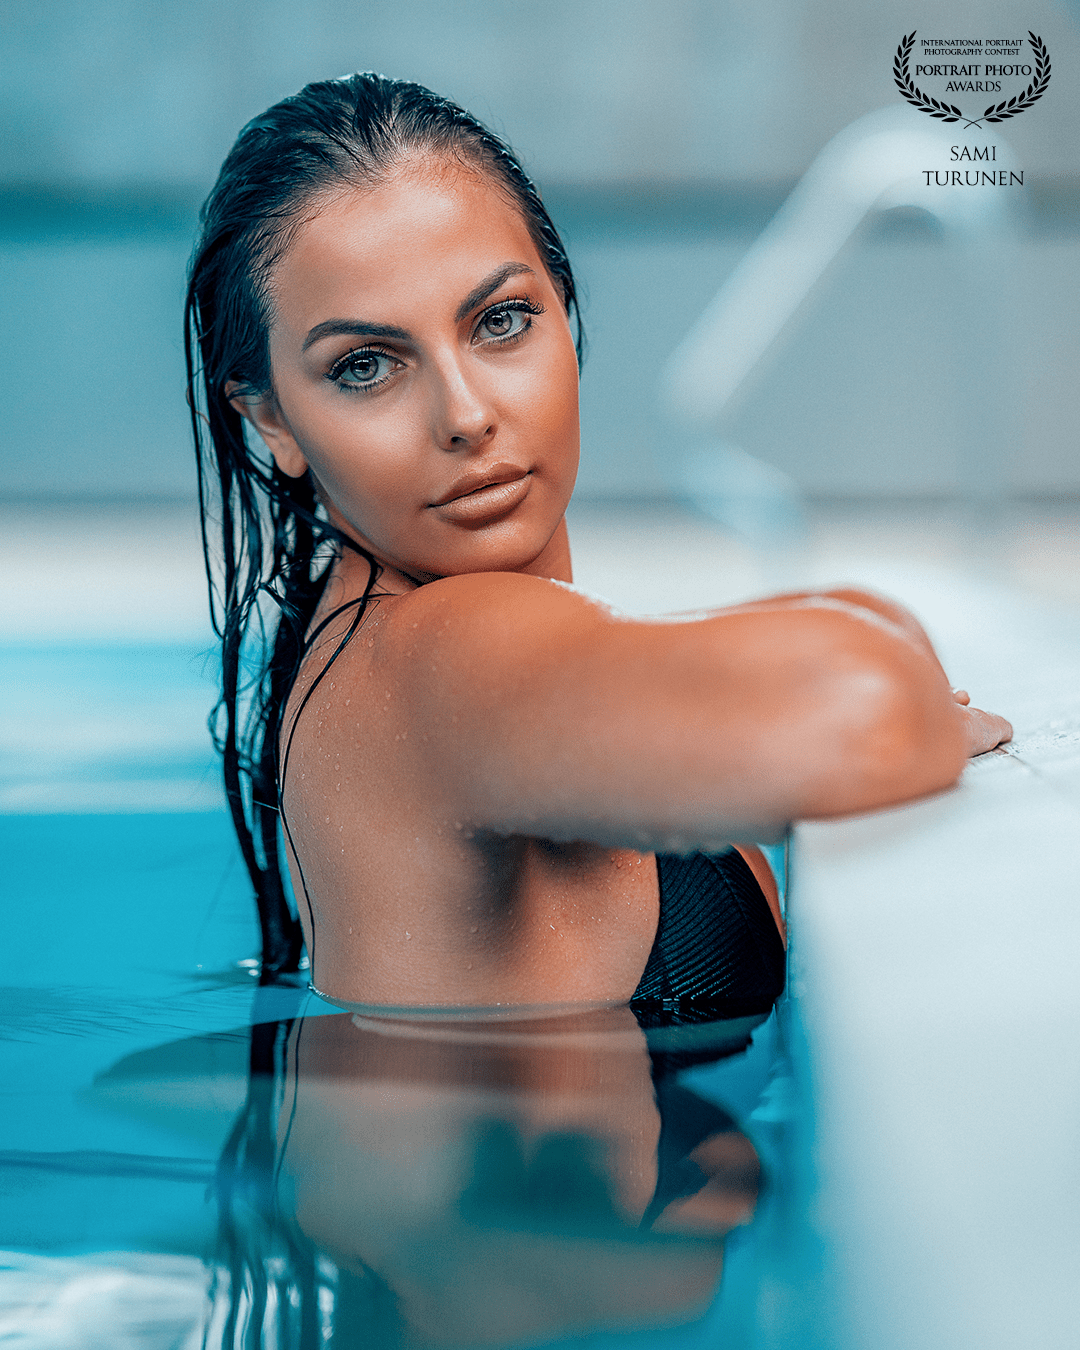 Swimming pool photo shoot. I used Godox AD600 light because we were shooting against a window and strong backlit. Model: Sahar Larbi.